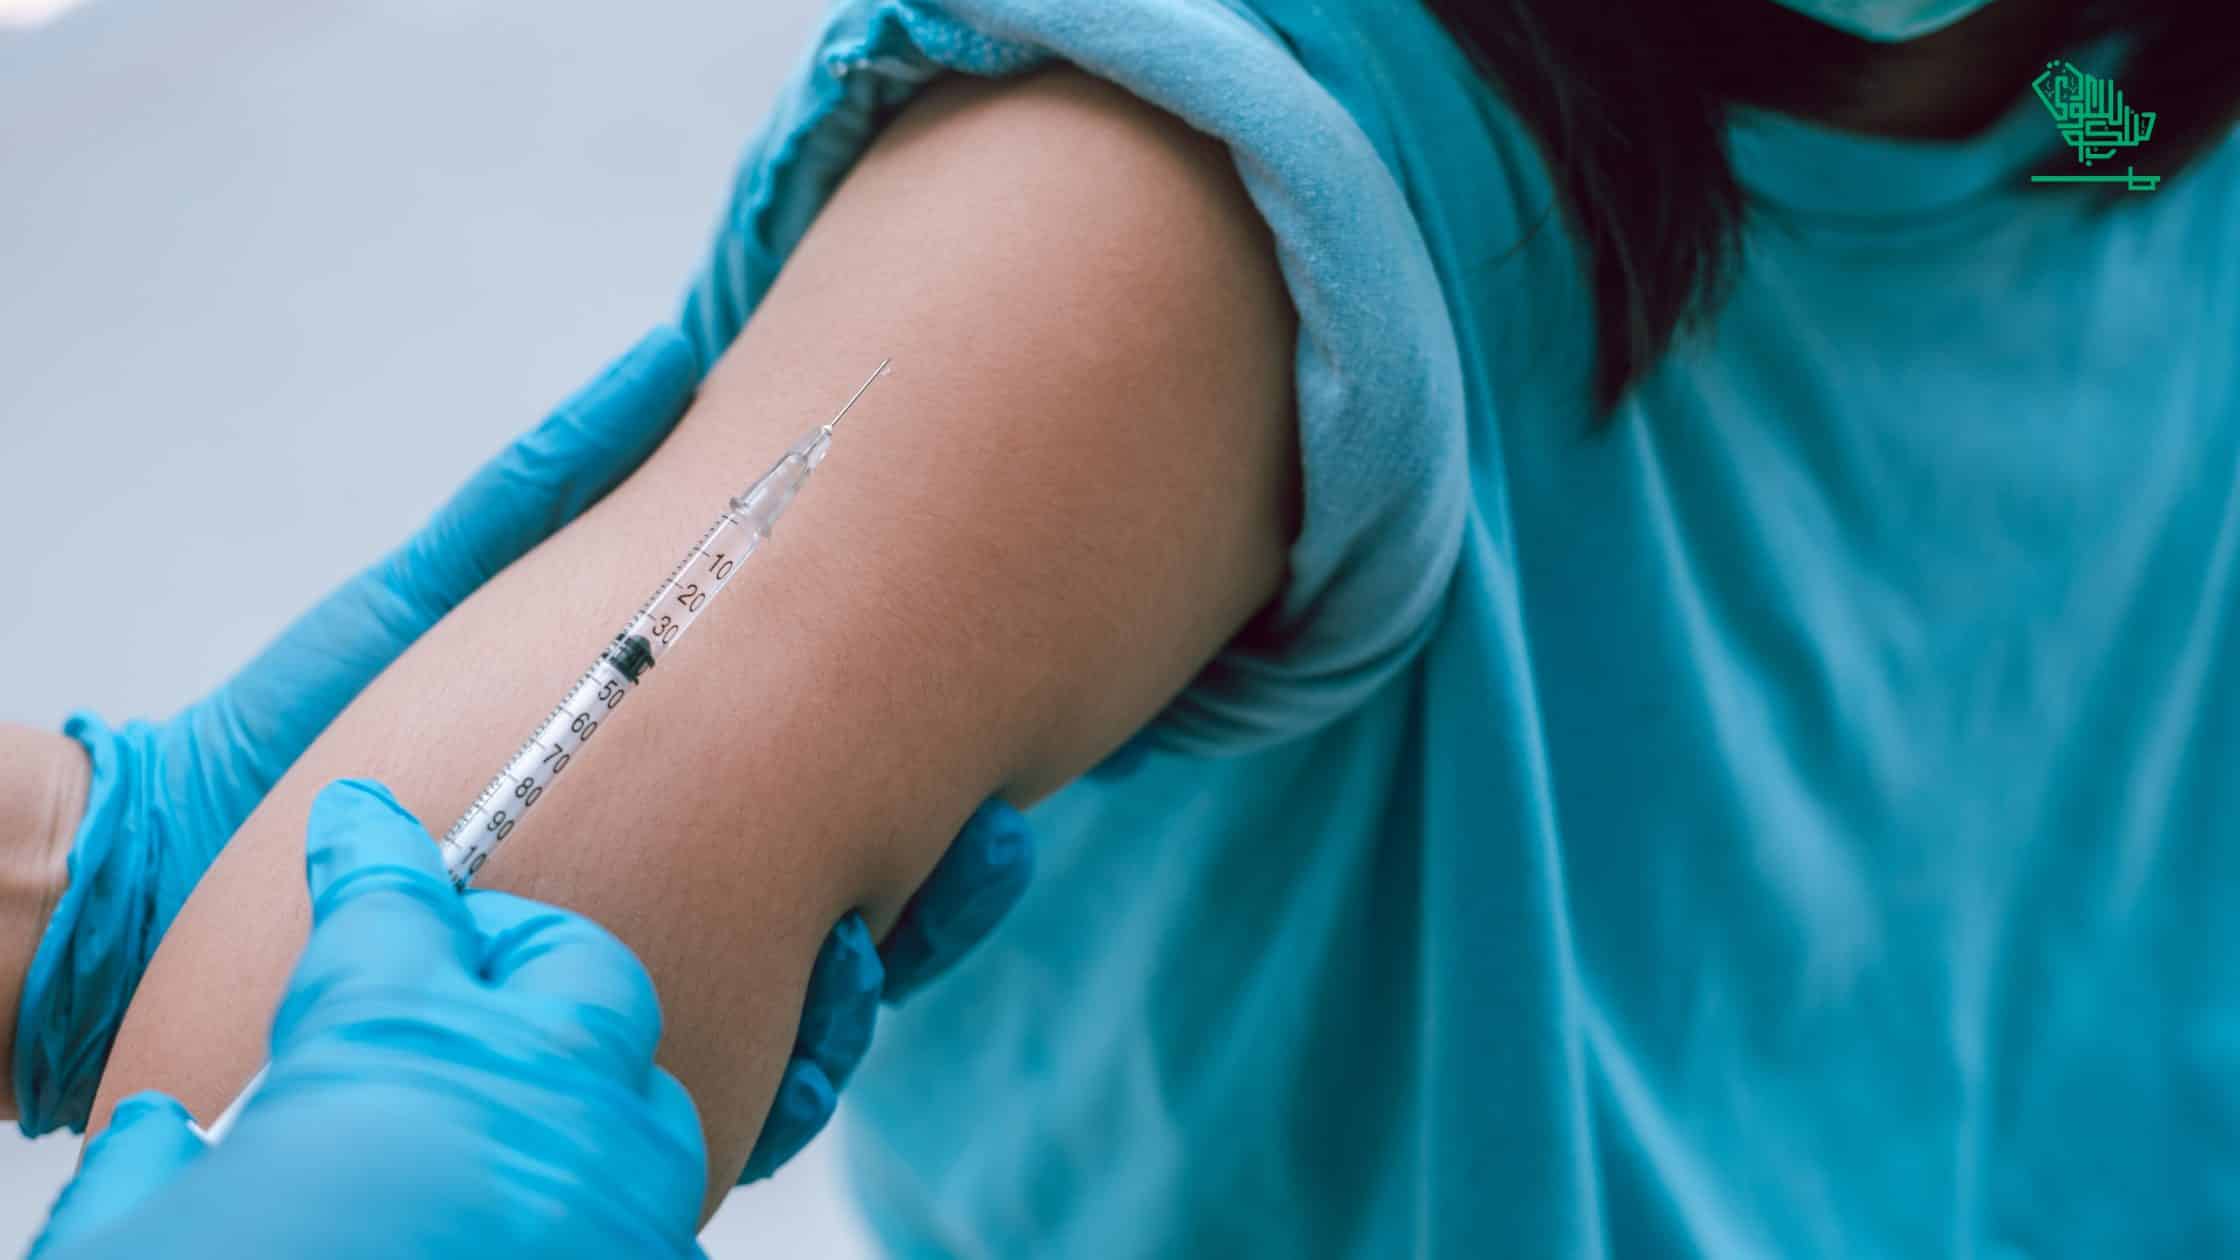 Only fully Vaccinated can attend public events in Saudi Arabia from Oct. 10